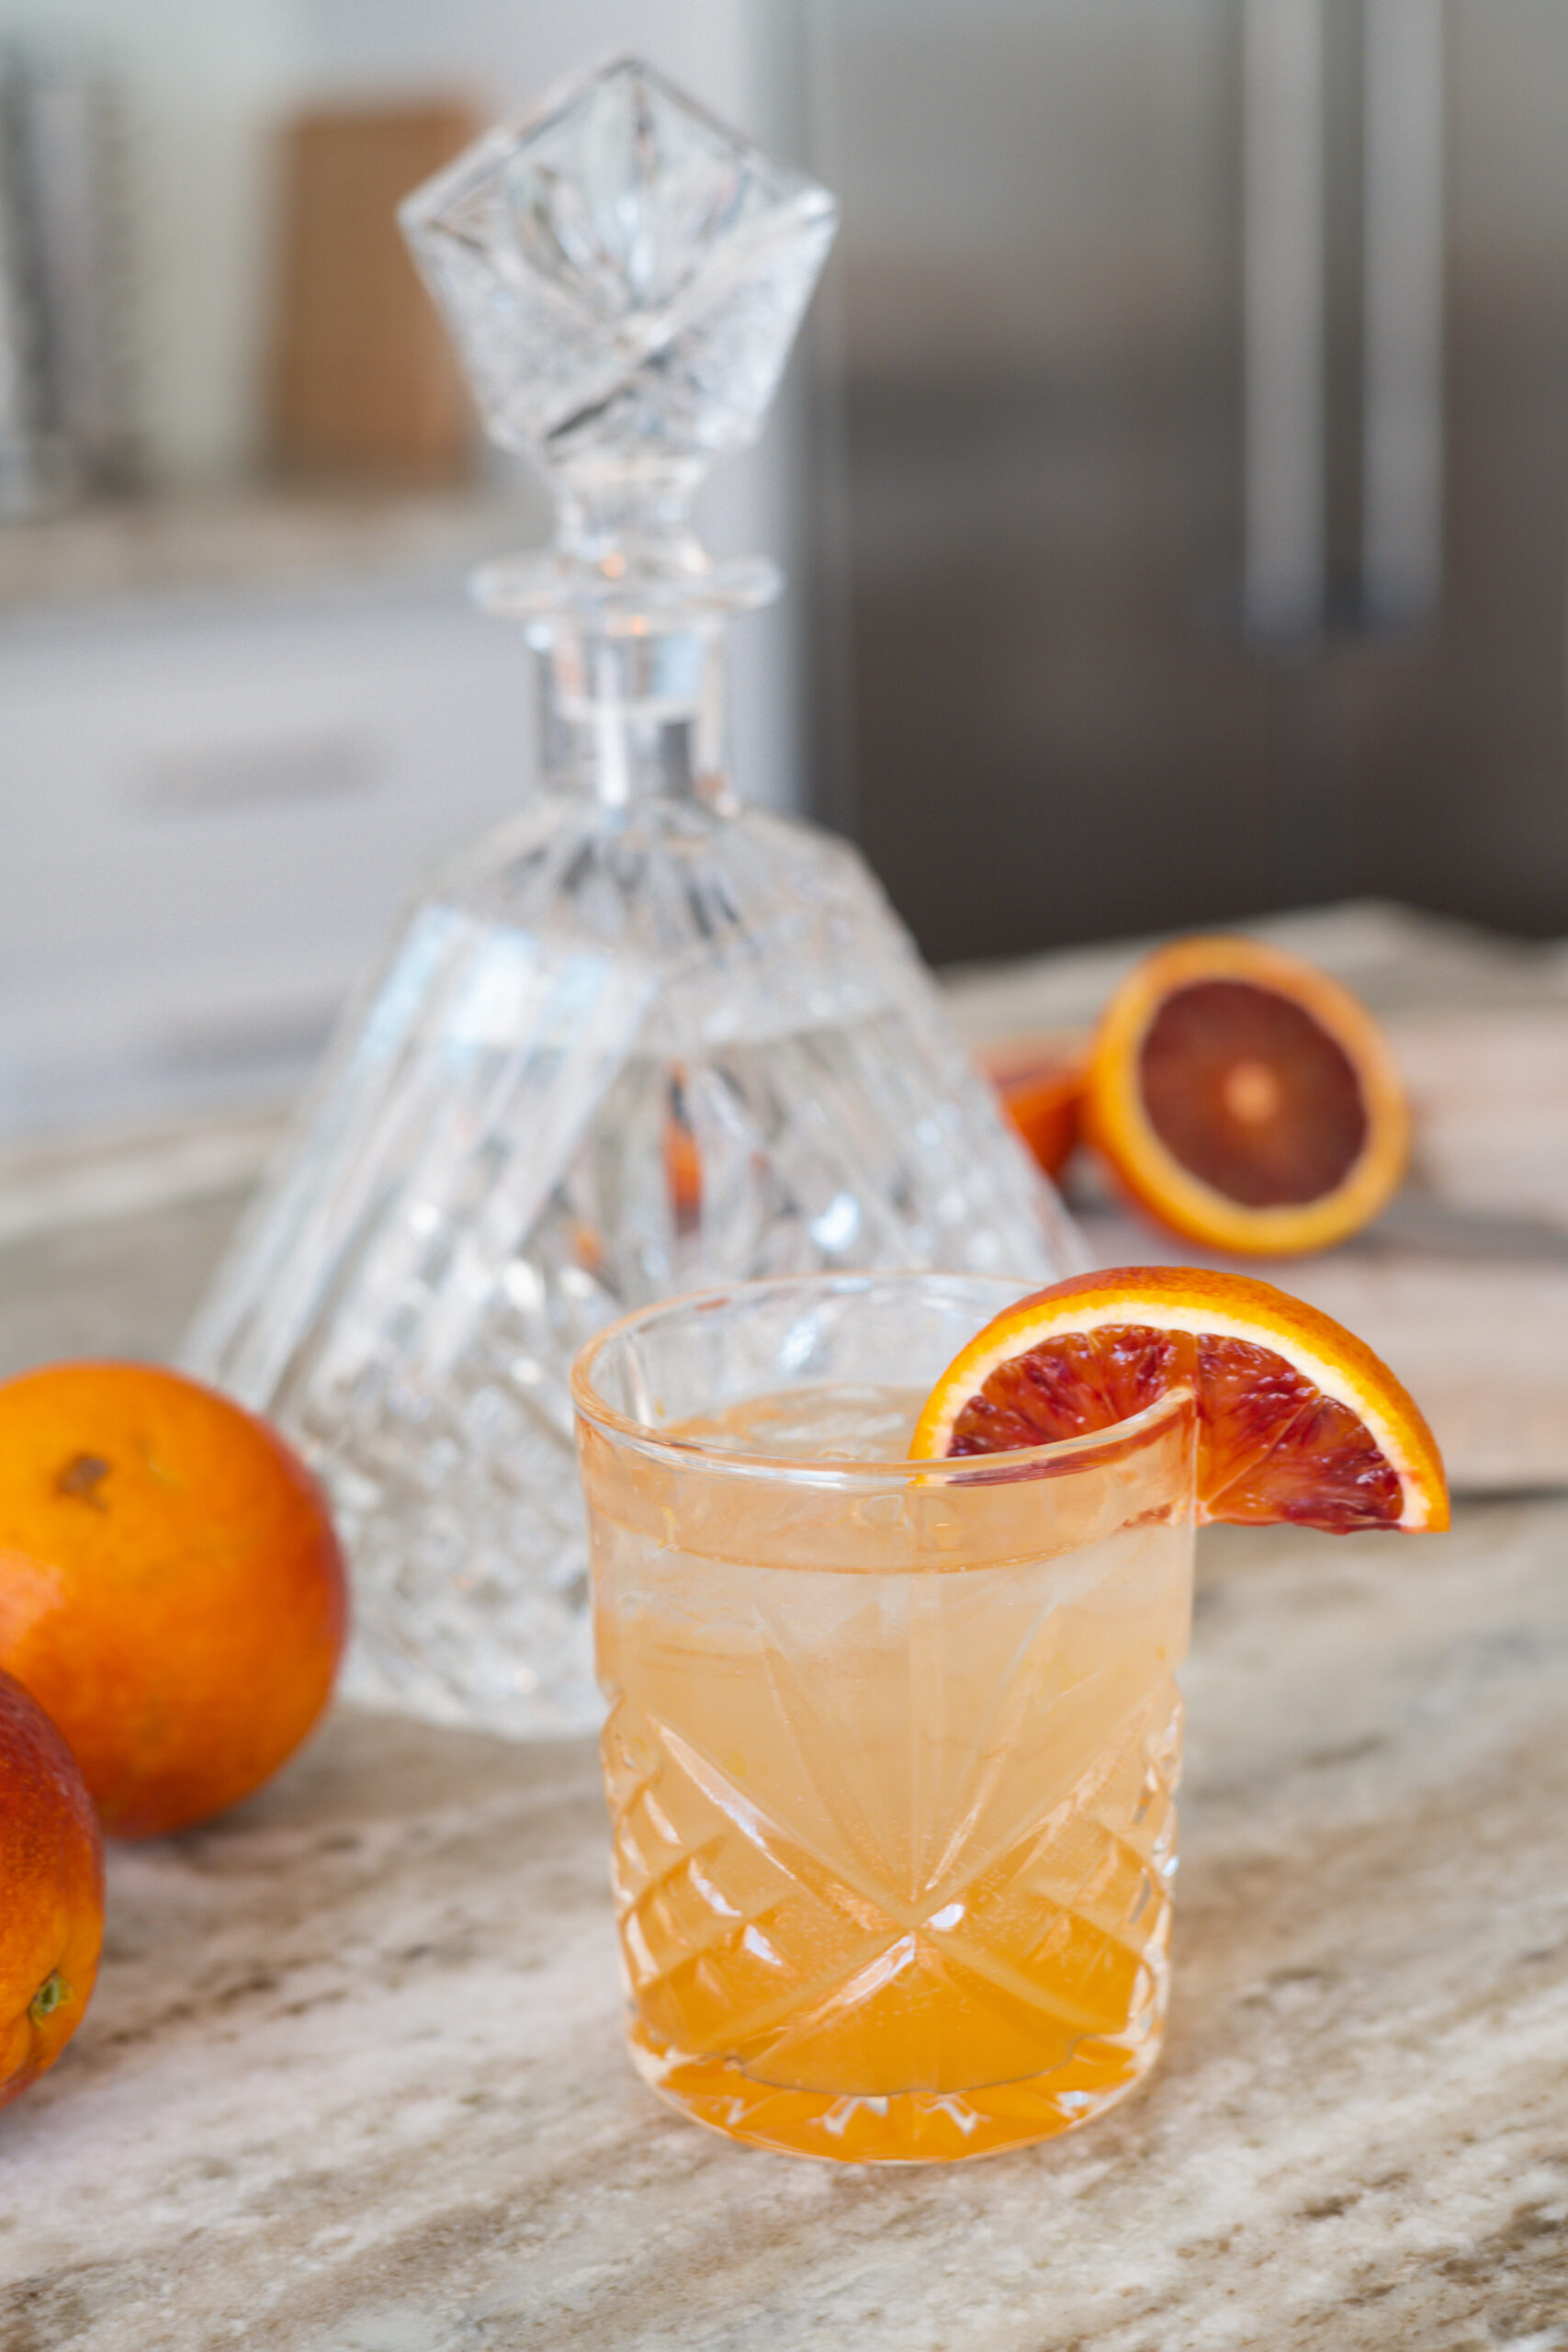 Short cocktail glass with an orange drink and a blood orange slice. There are blood orange slices in the background with a crystal decanter.